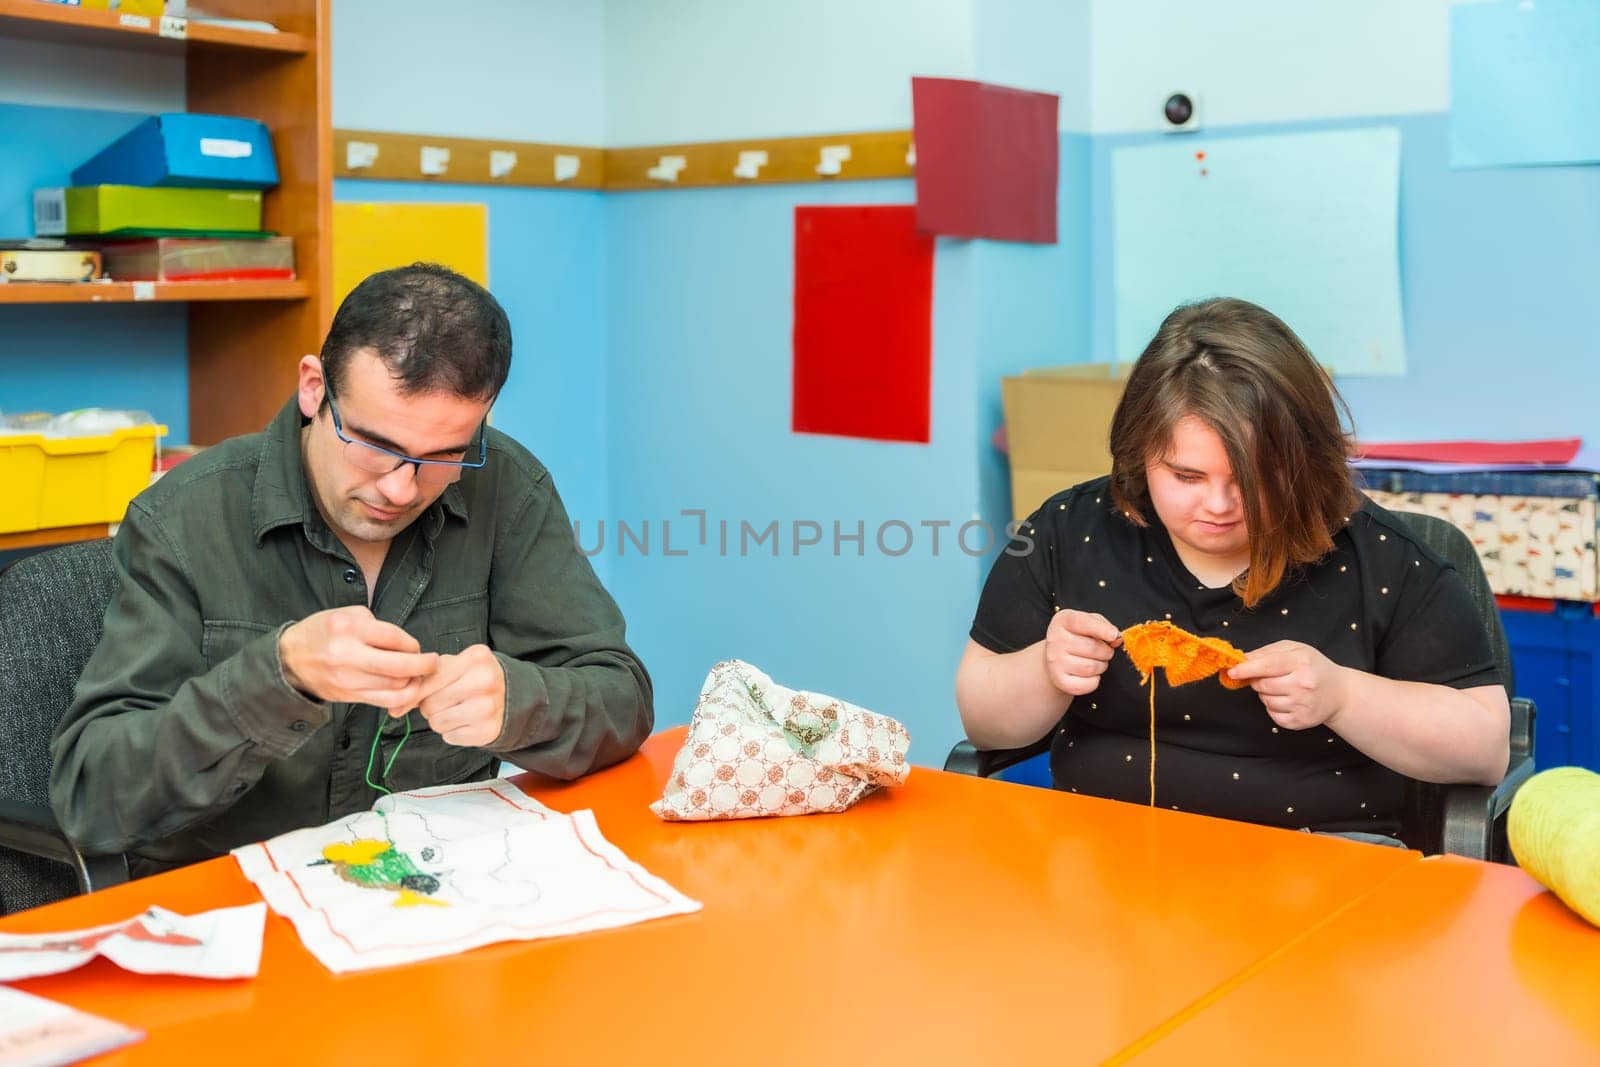 People with intellectual disabilities knitting clothes with wool by Huizi